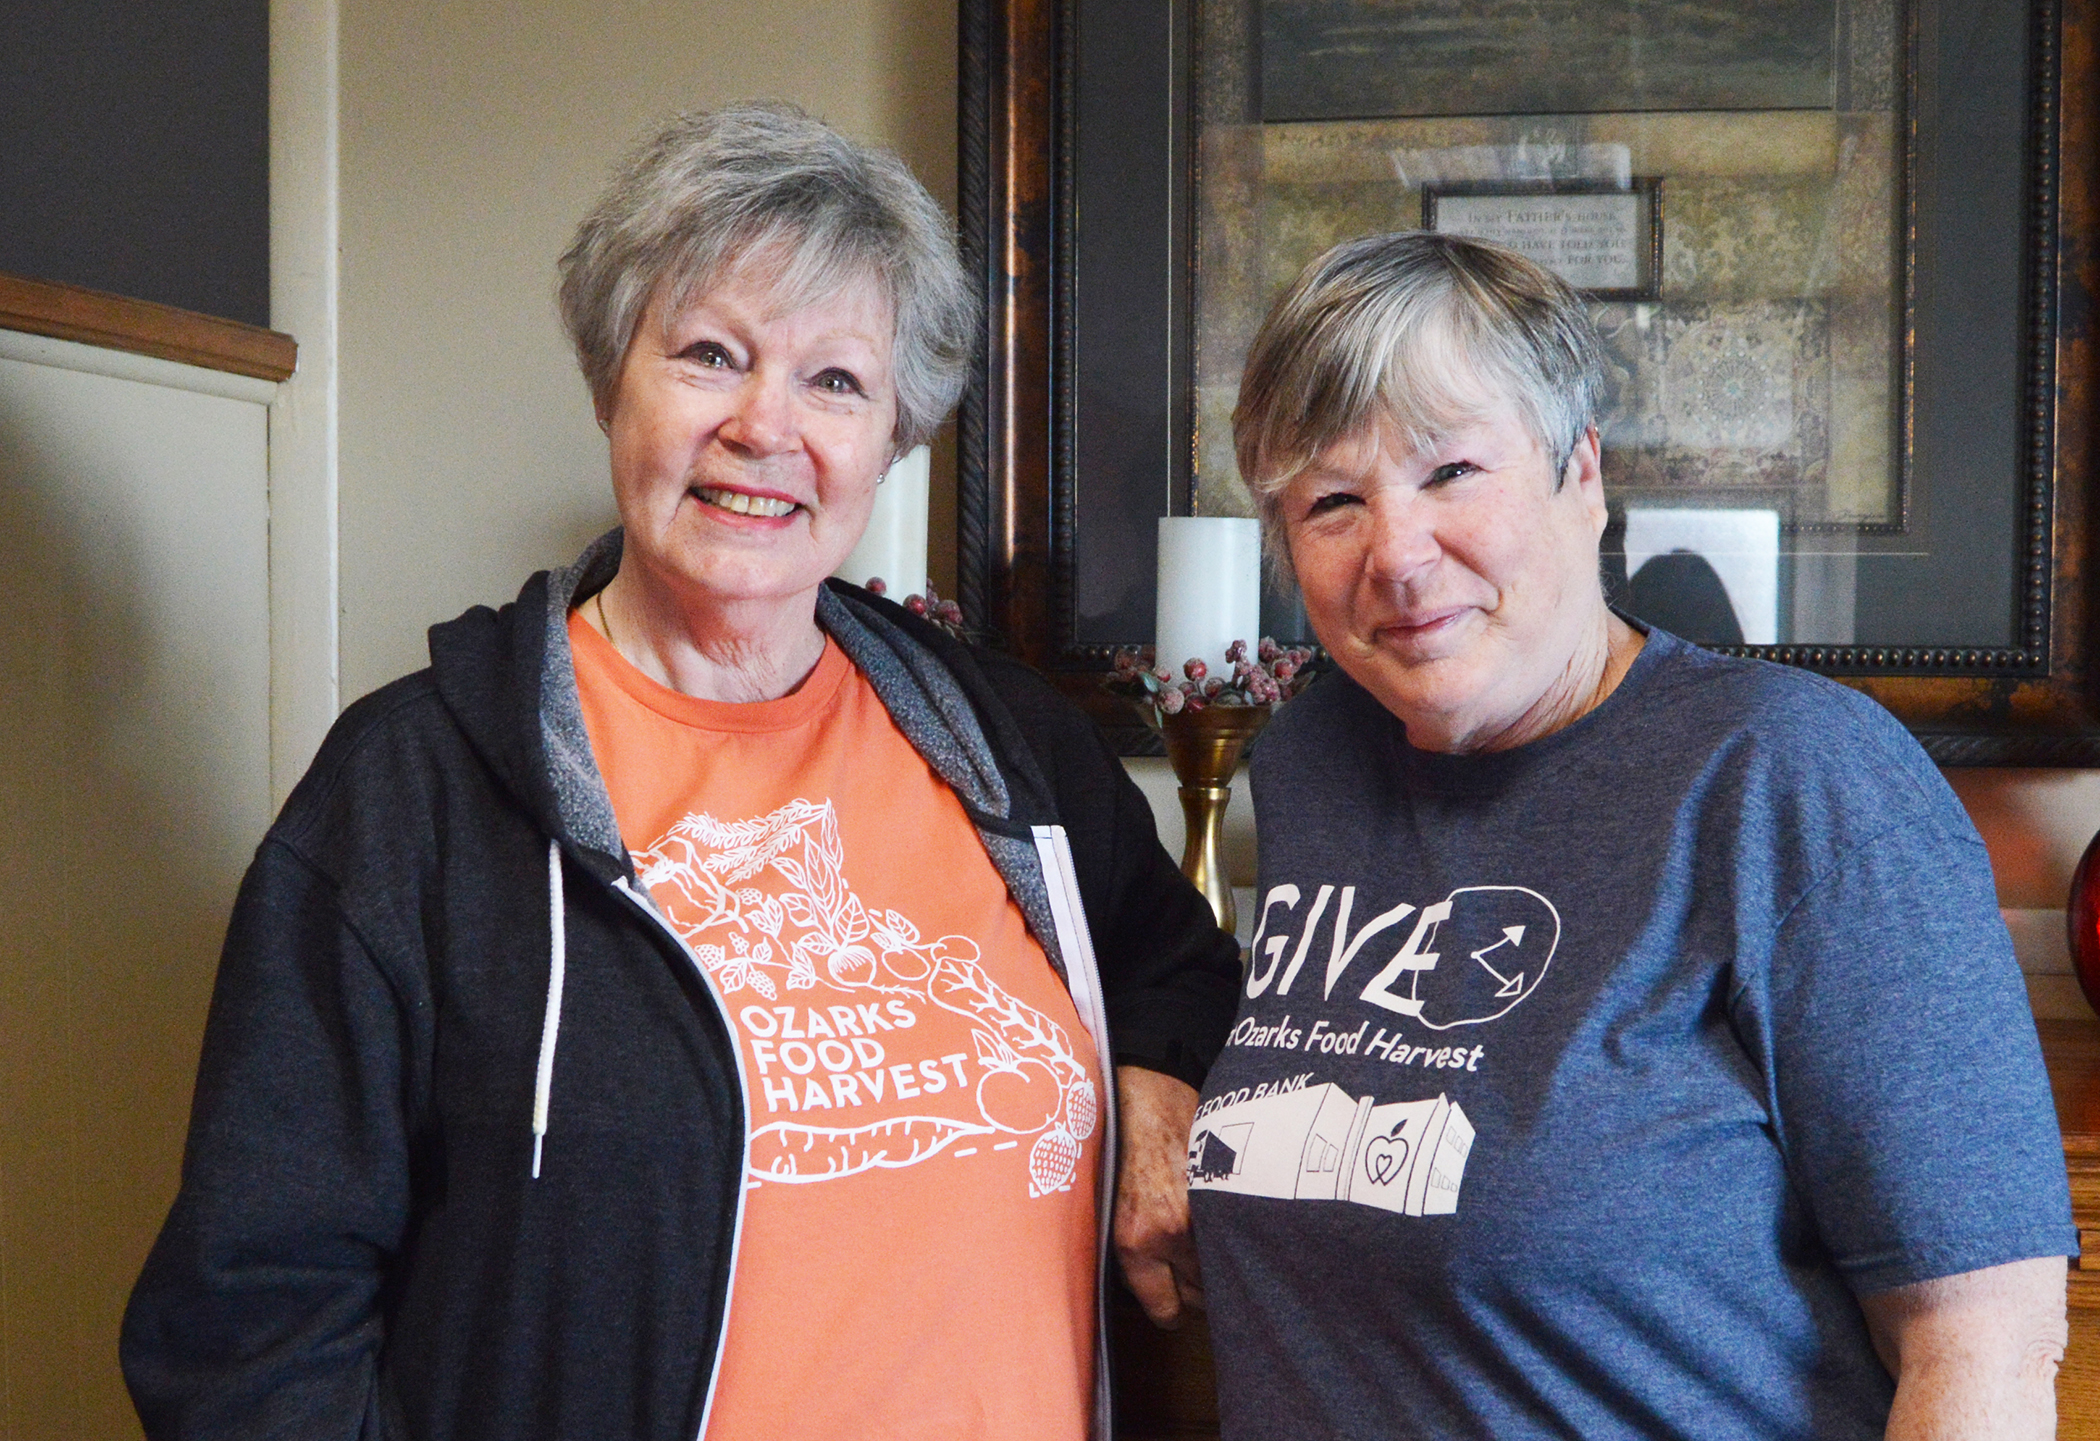 Retired sisters stay close by giving back together